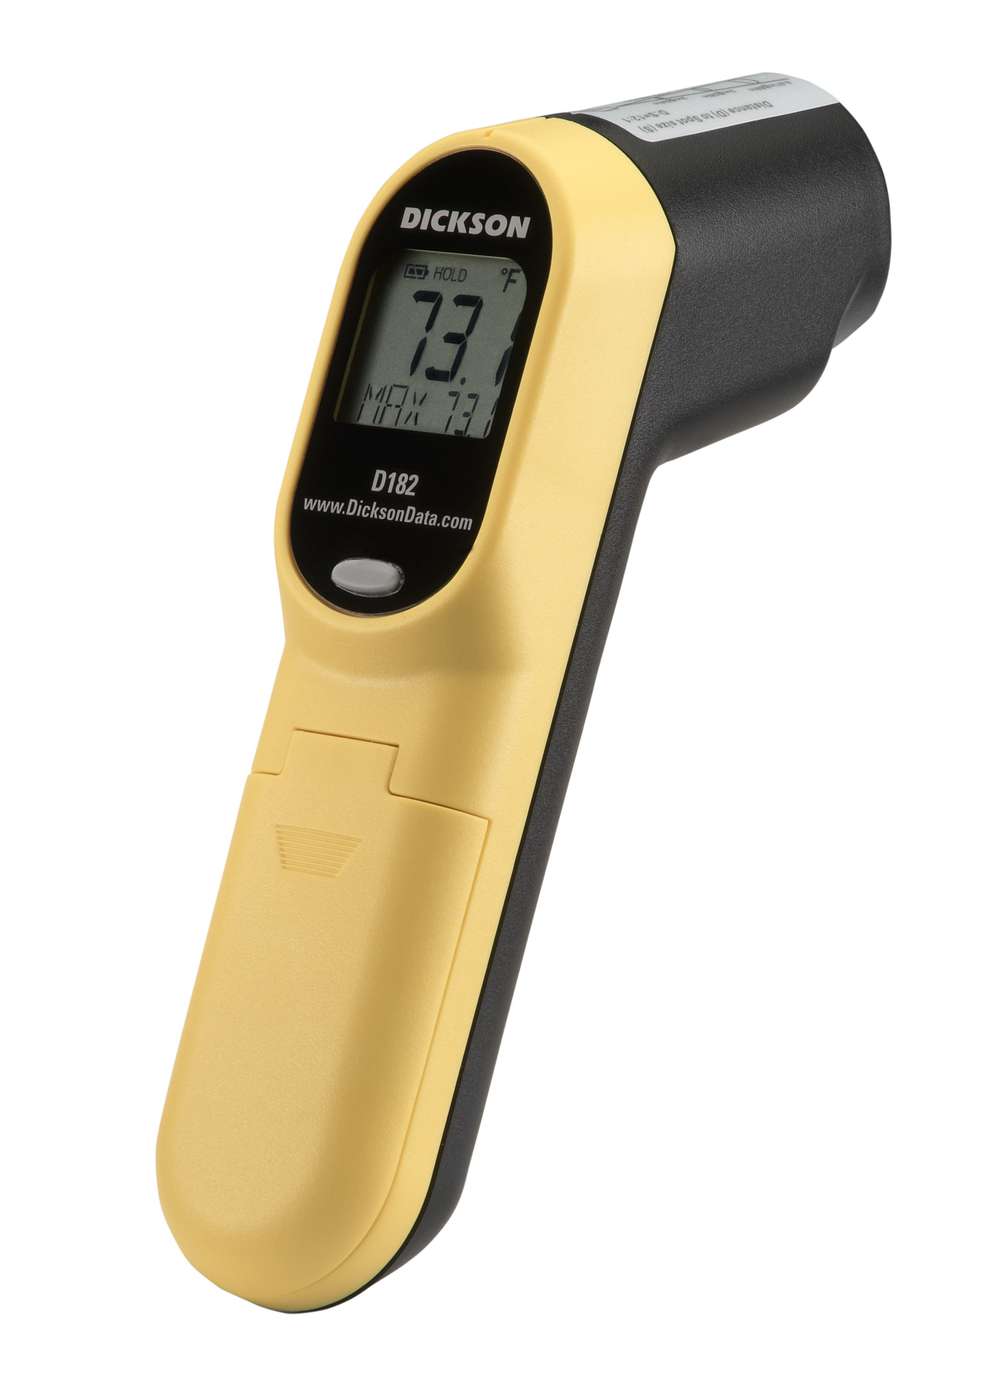 D182, Infrared Thermometer, Dickson